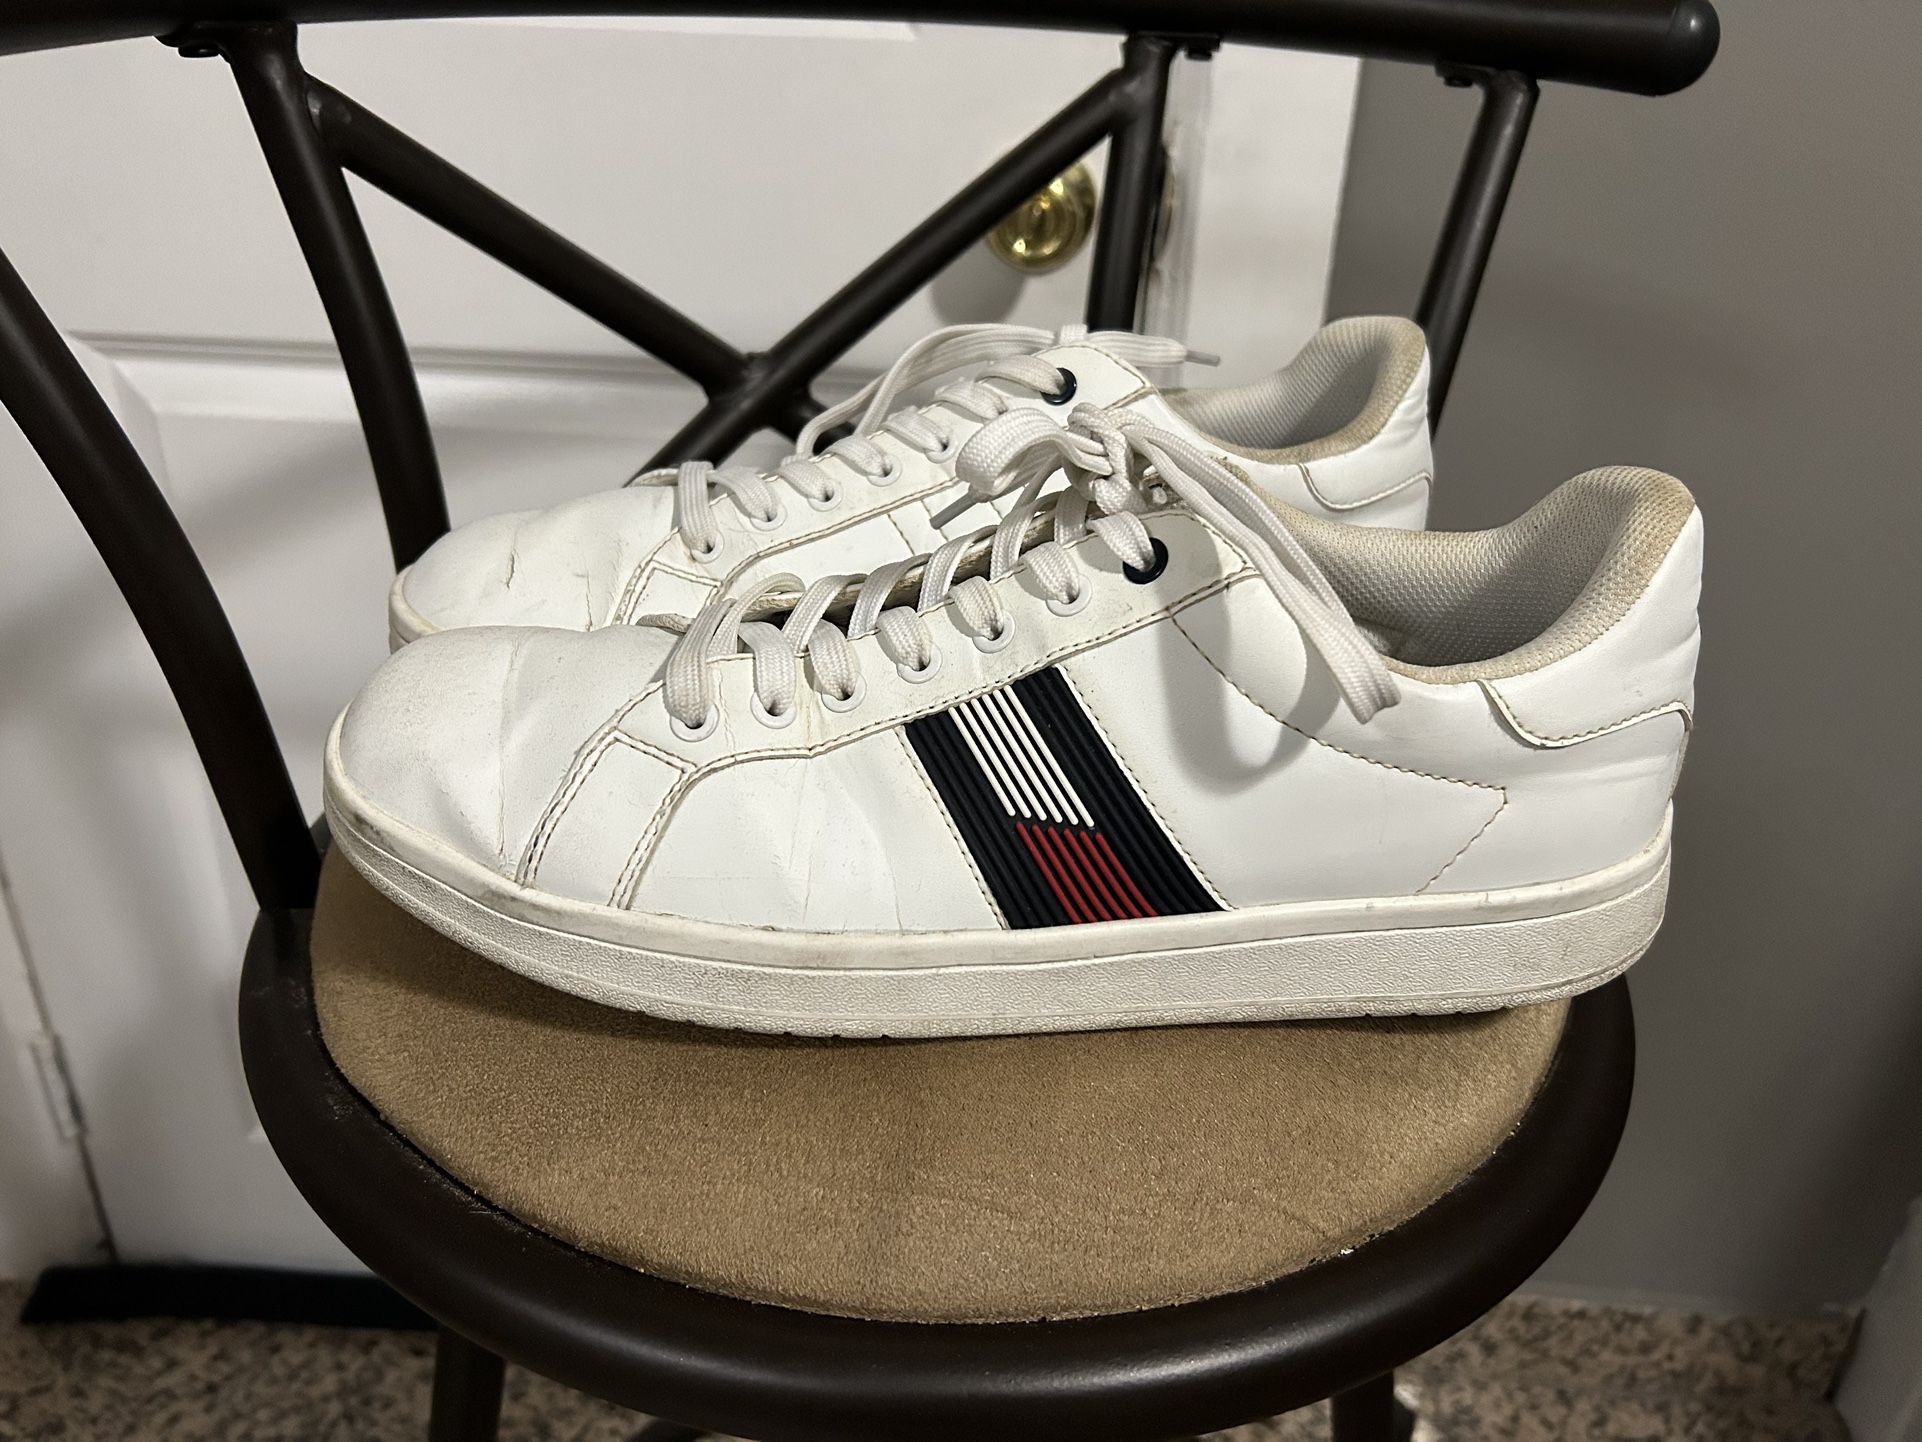 Tommy Hilfiger Men's Shoes Size 11 1/2 for Sale in The Bronx, NY -